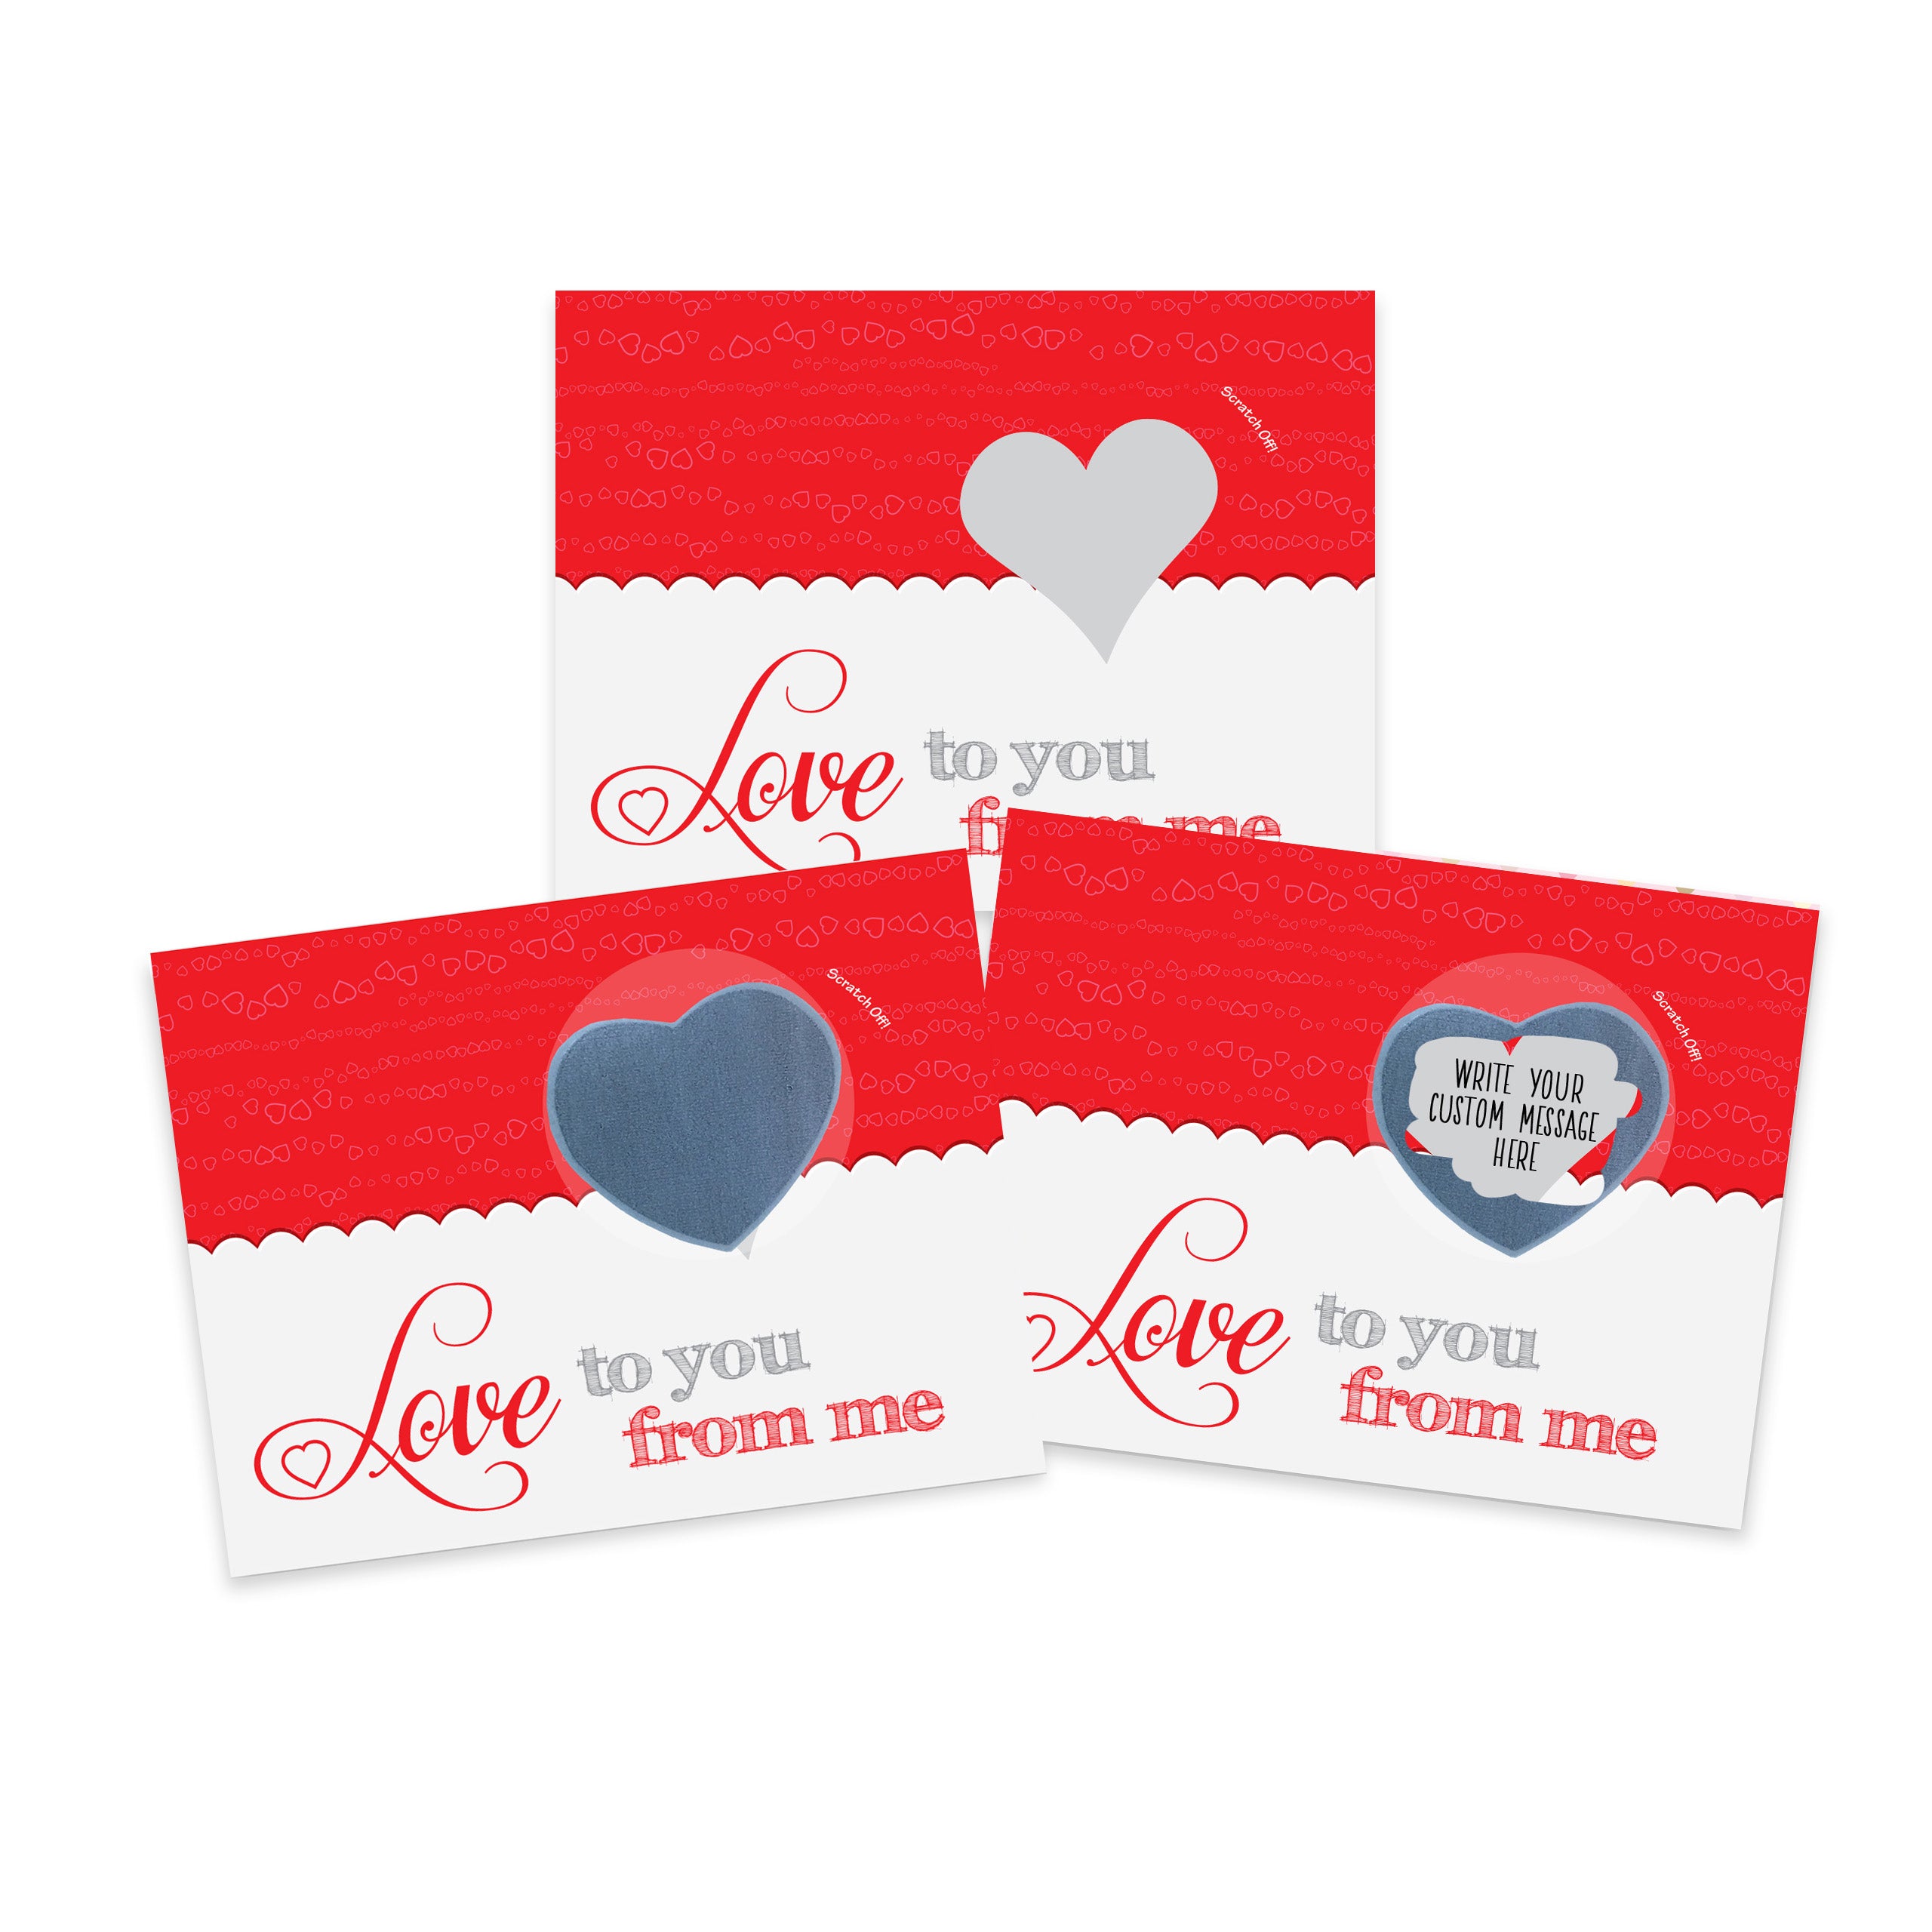 Make Your Own Scratch Off Love Notes Kit of 25 for Valentine's Day - My Scratch Offs